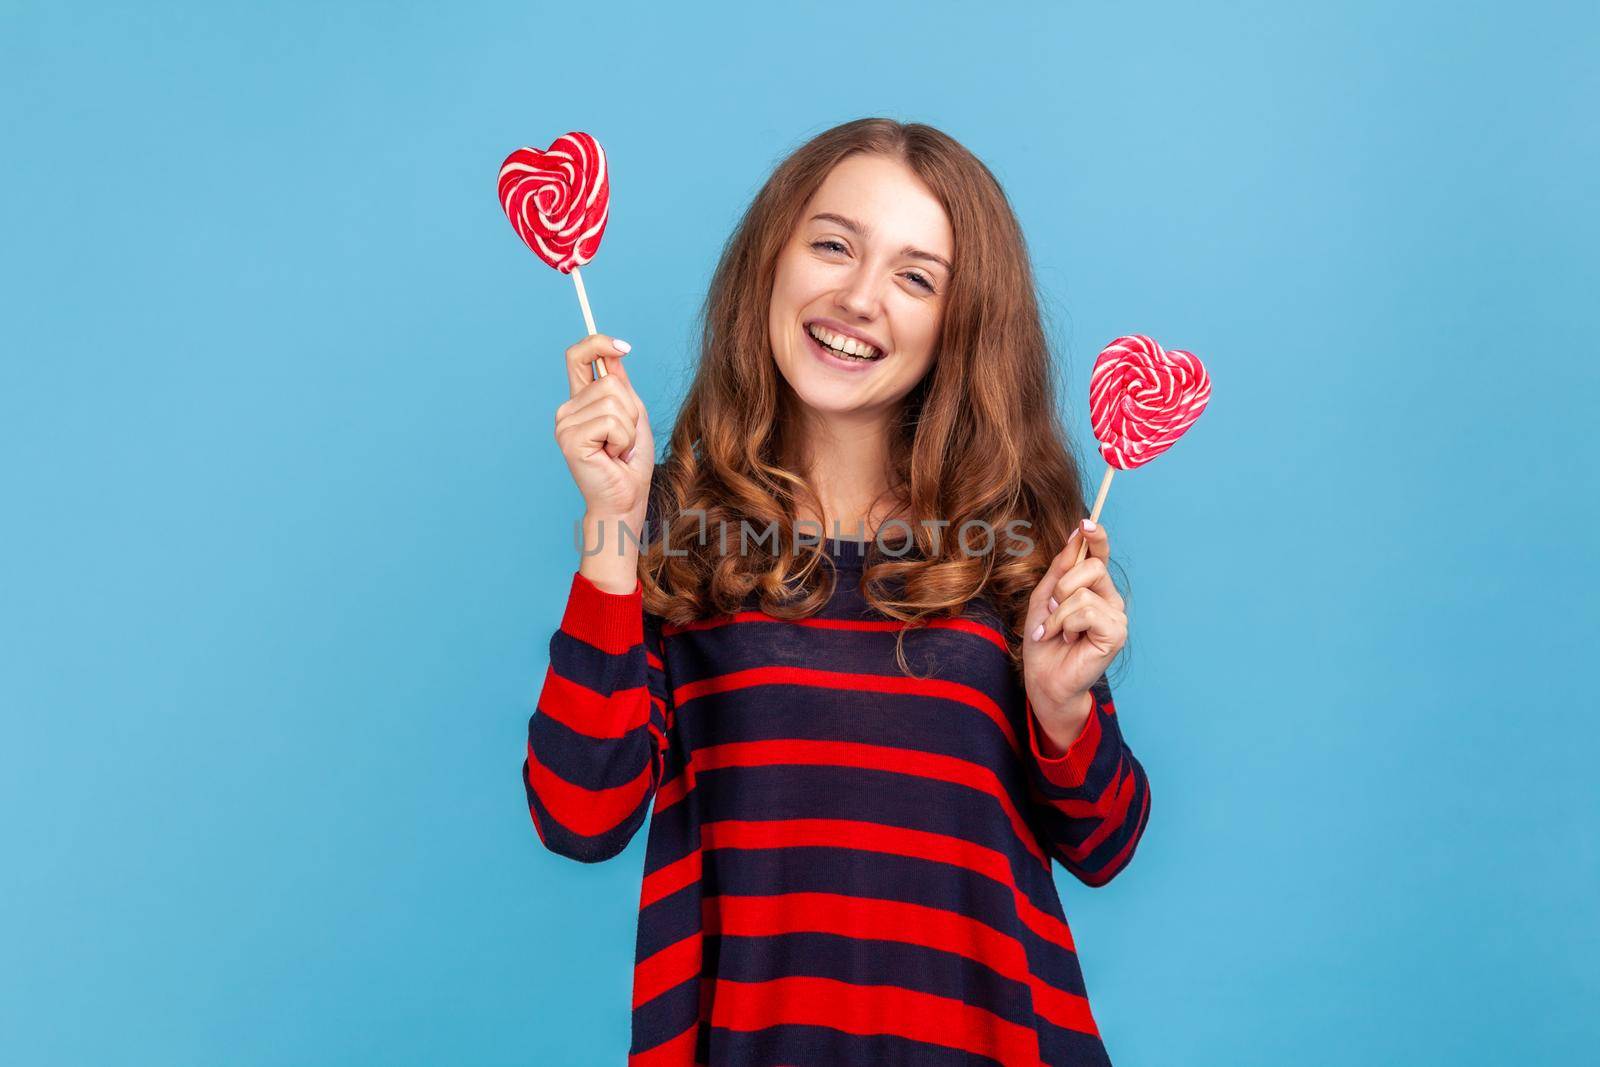 Satisfied young adult woman wearing striped casual style sweater, standing with two heart shape candies, looking at camera with toothy smile. Indoor studio shot isolated on blue background.